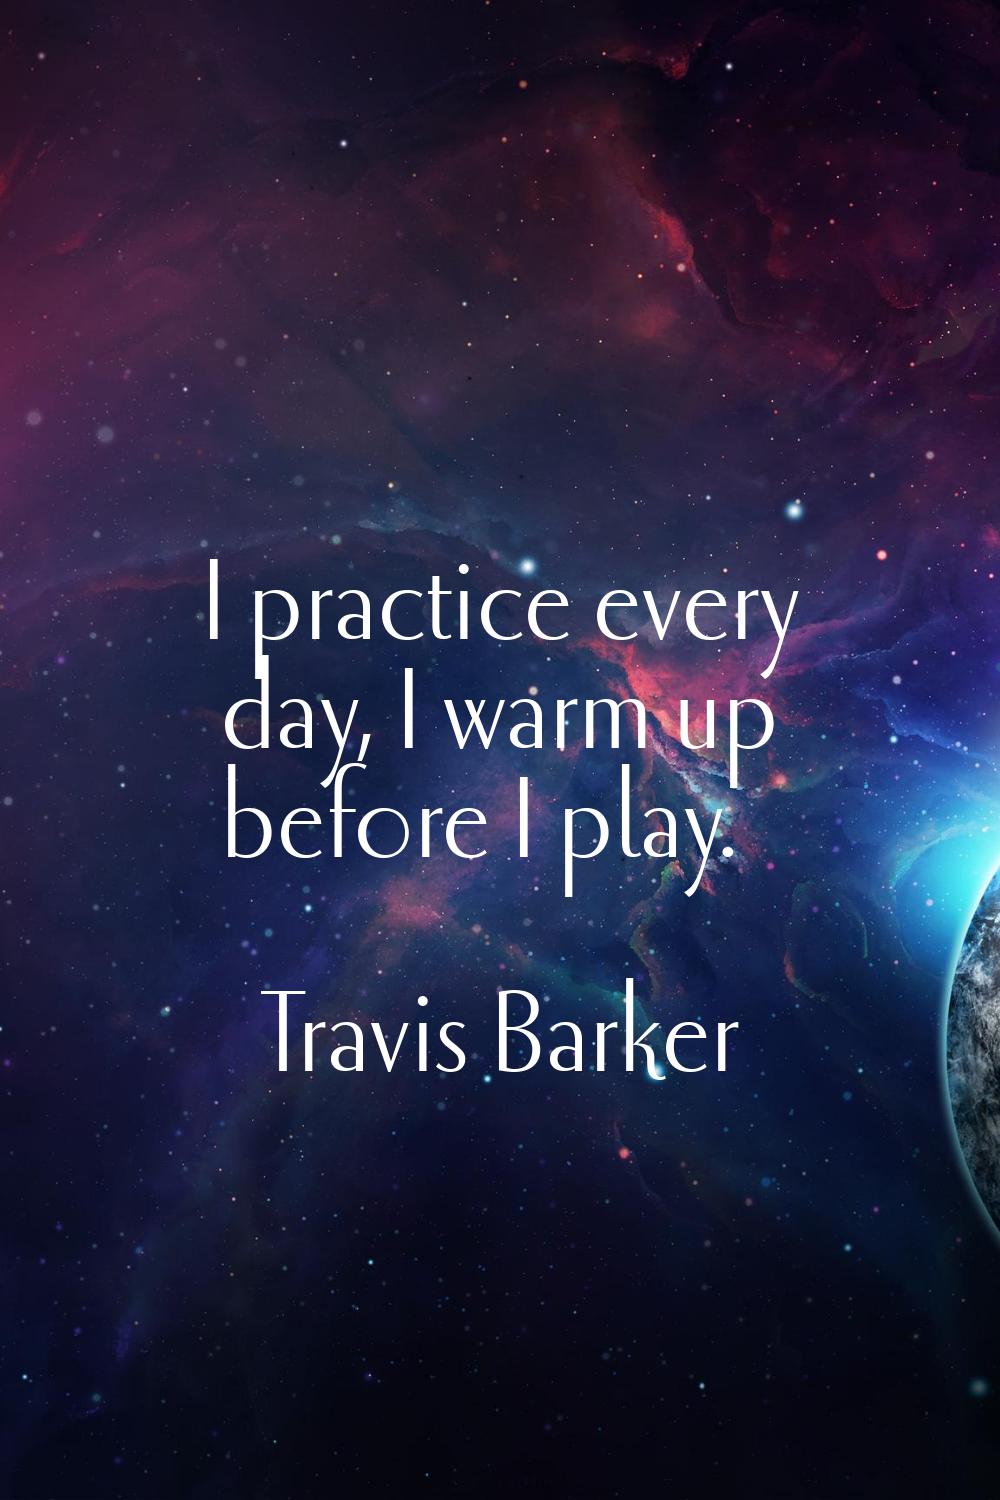 I practice every day, I warm up before I play.